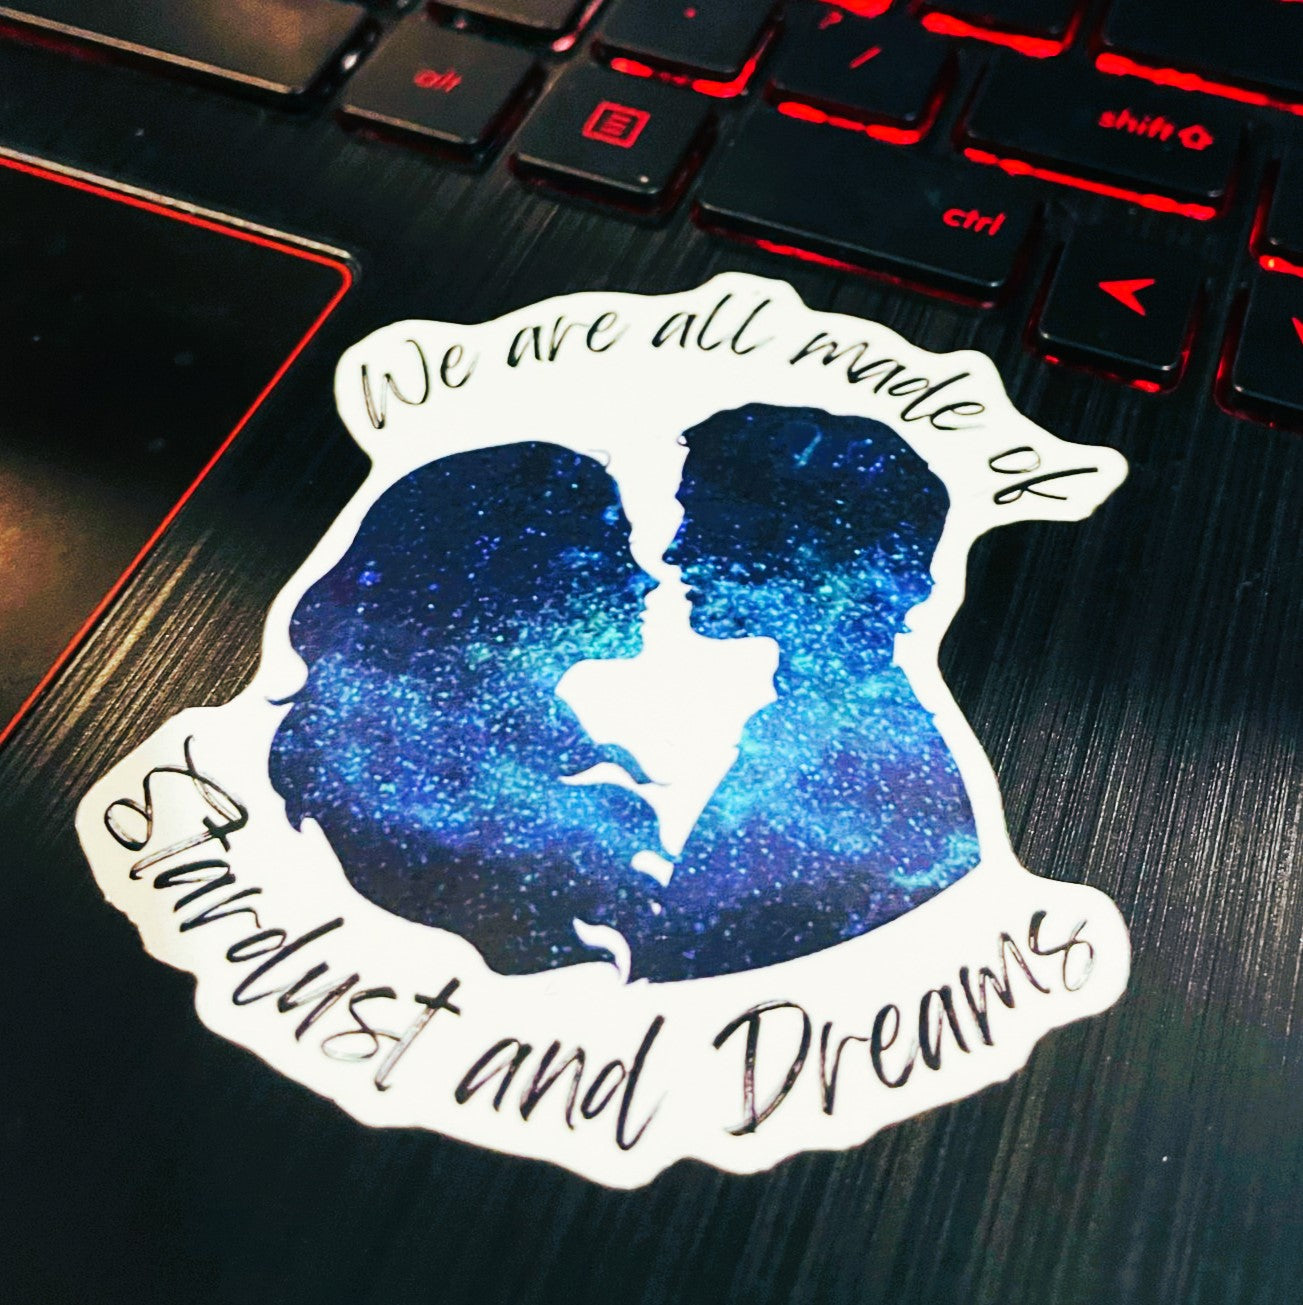 Sticker - Couple Silhouette - Stardust and Dreams